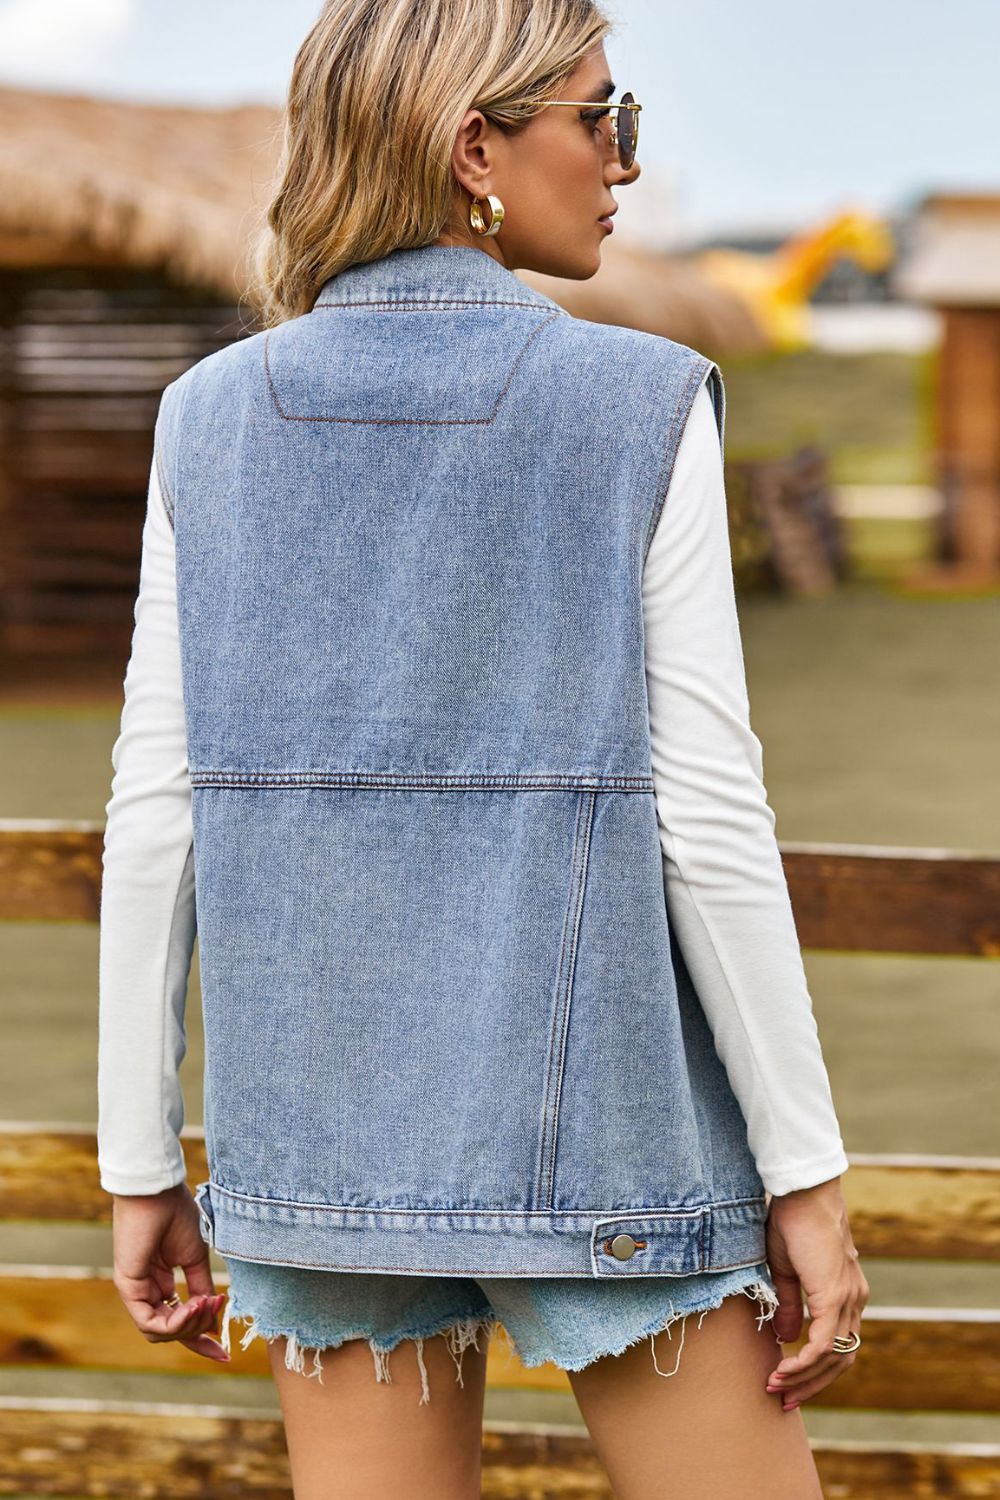 Sleeveless Collared Neck Denim Top with Pockets BLUE ZONE PLANET